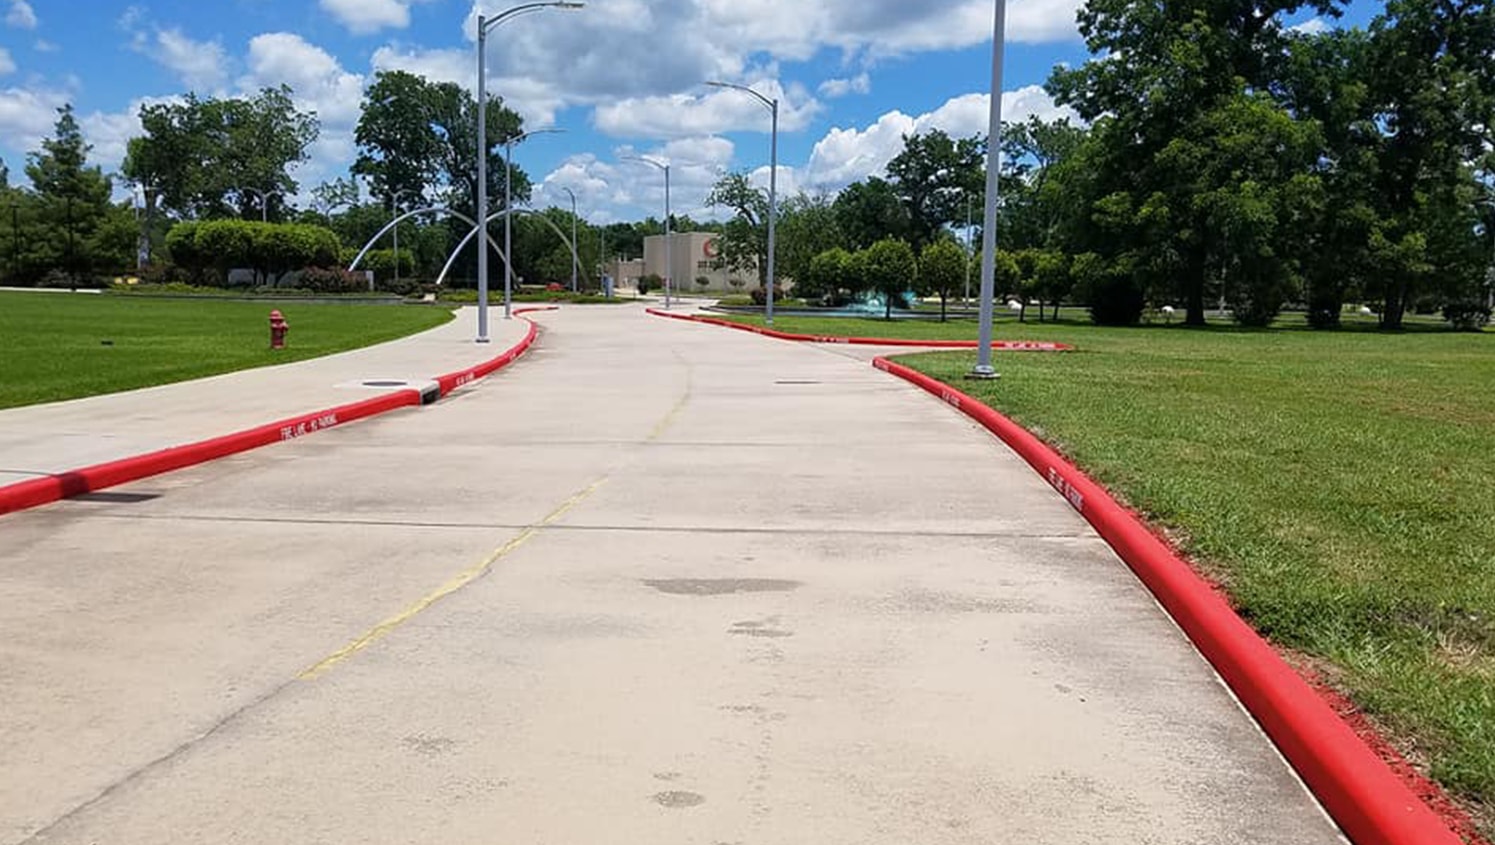 fire lane curb painted red